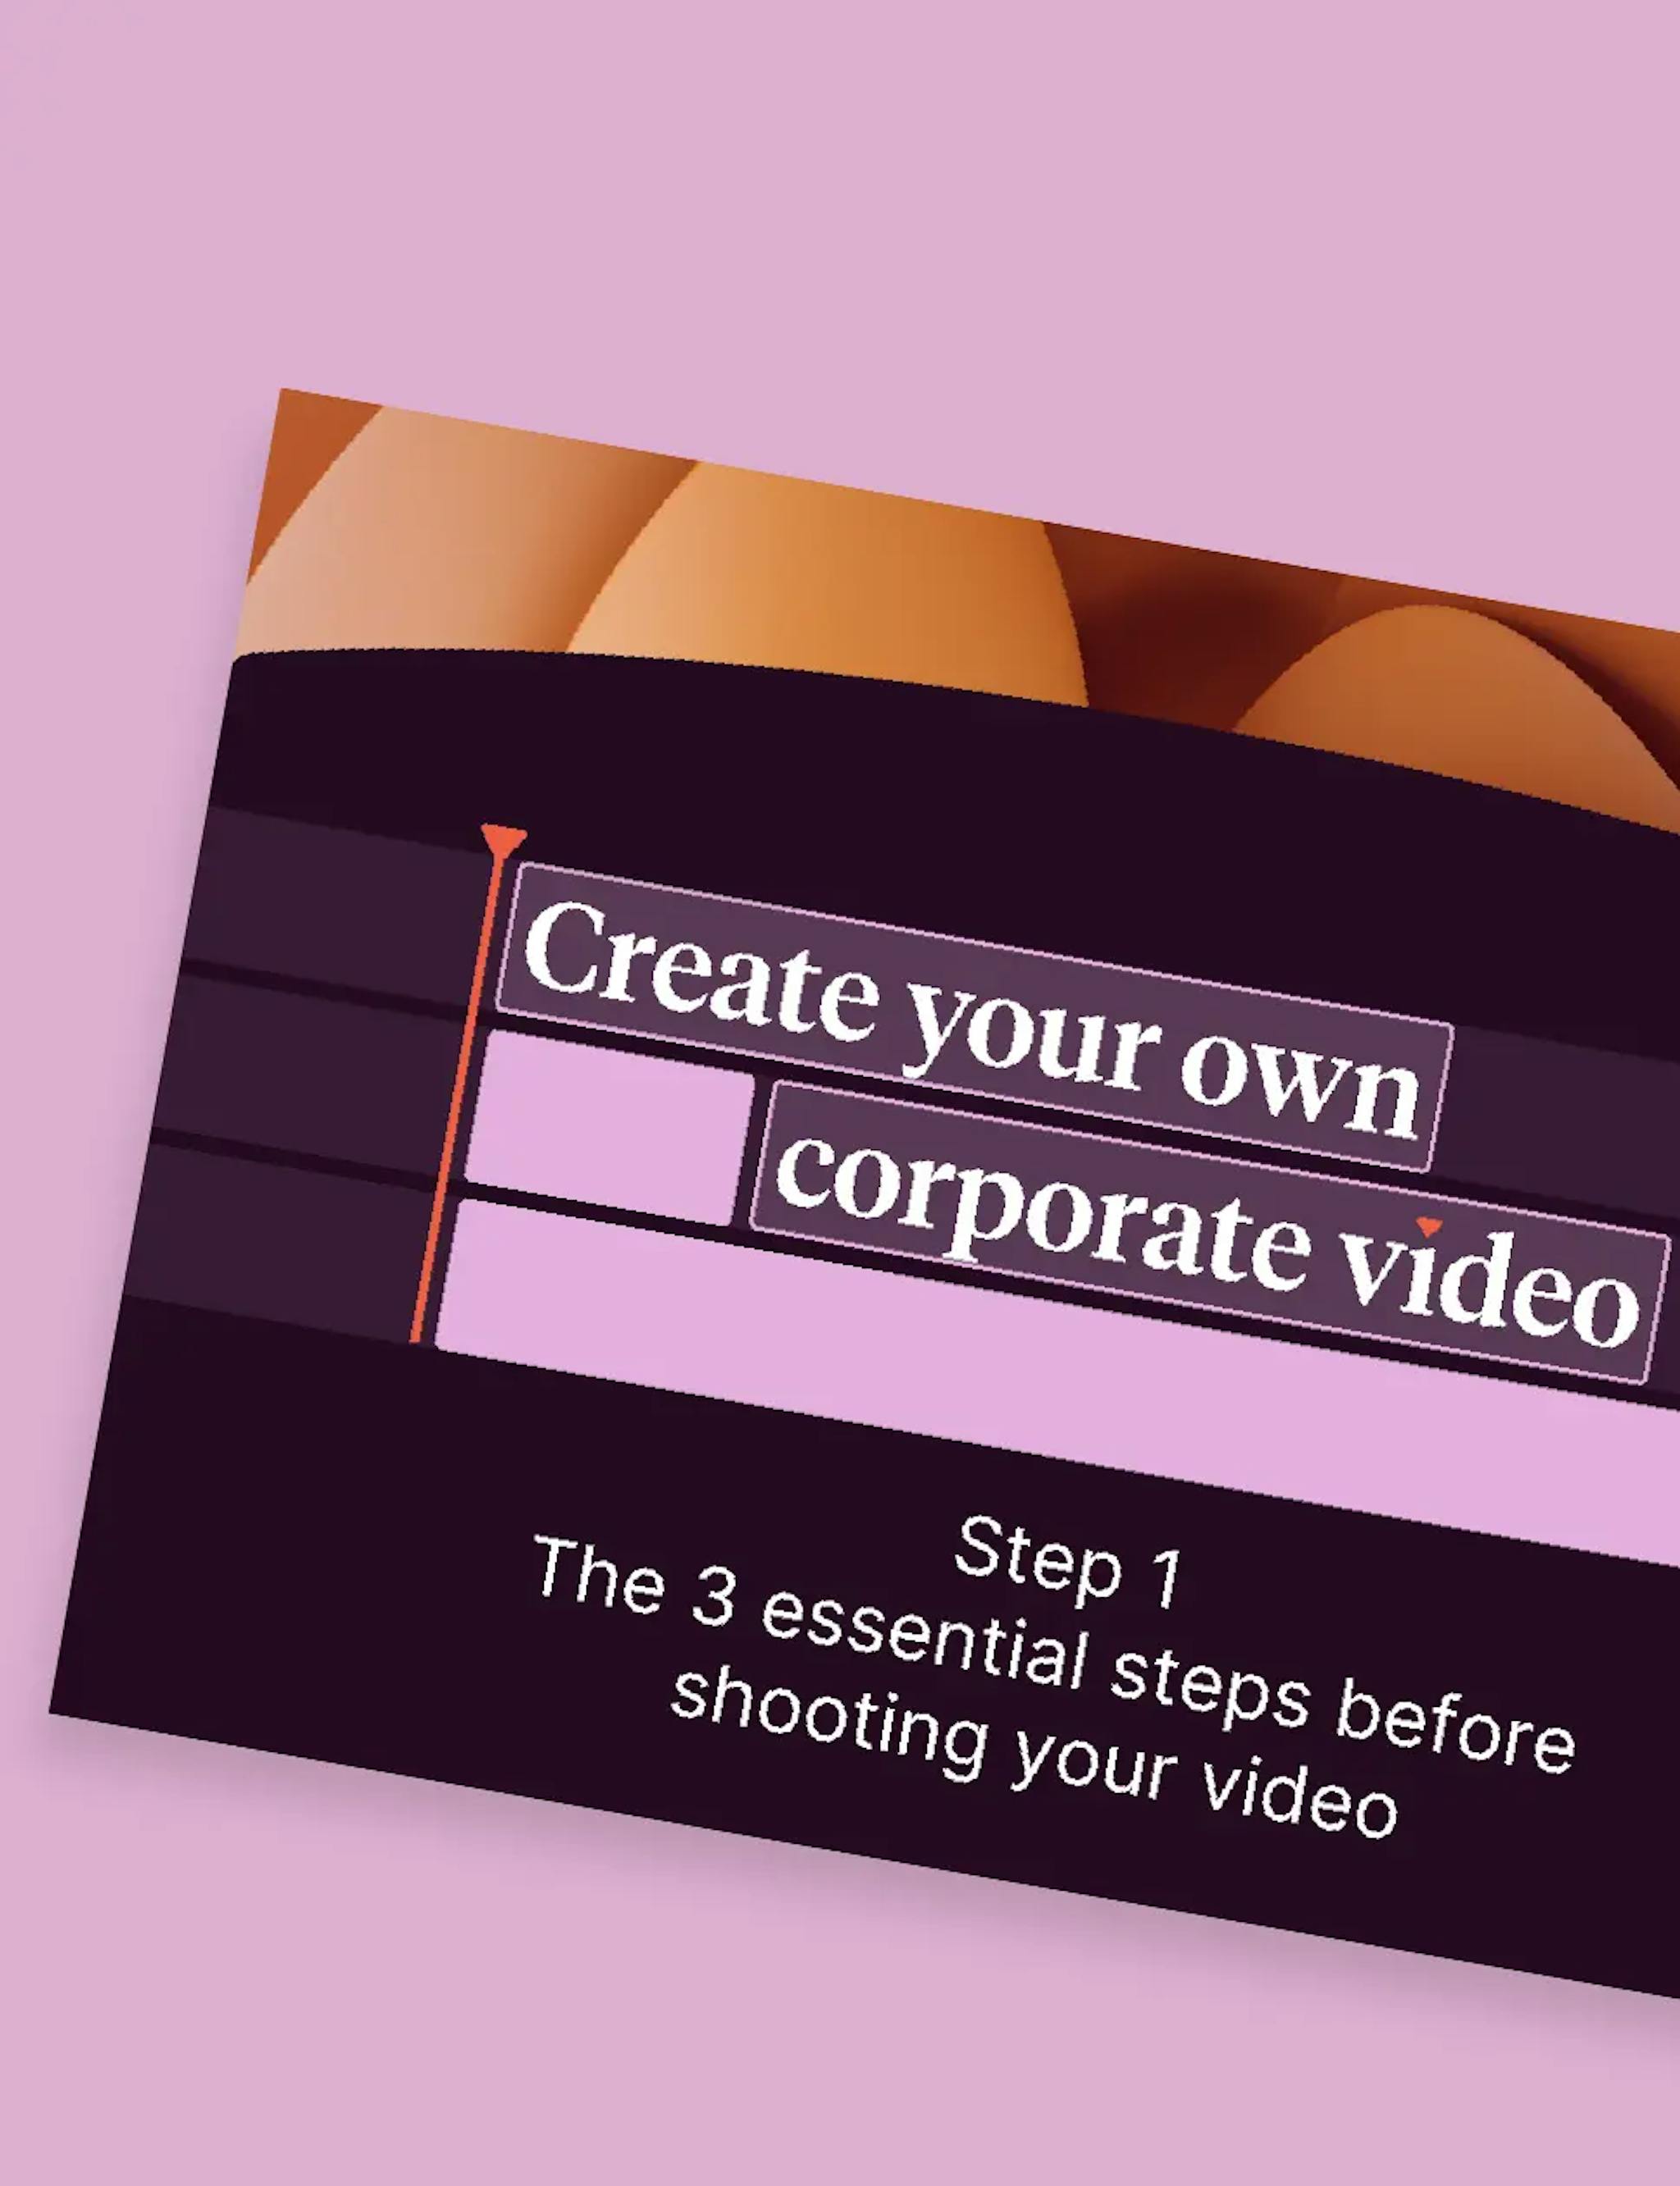 Whitebook step 1 to help you create your own corporate video